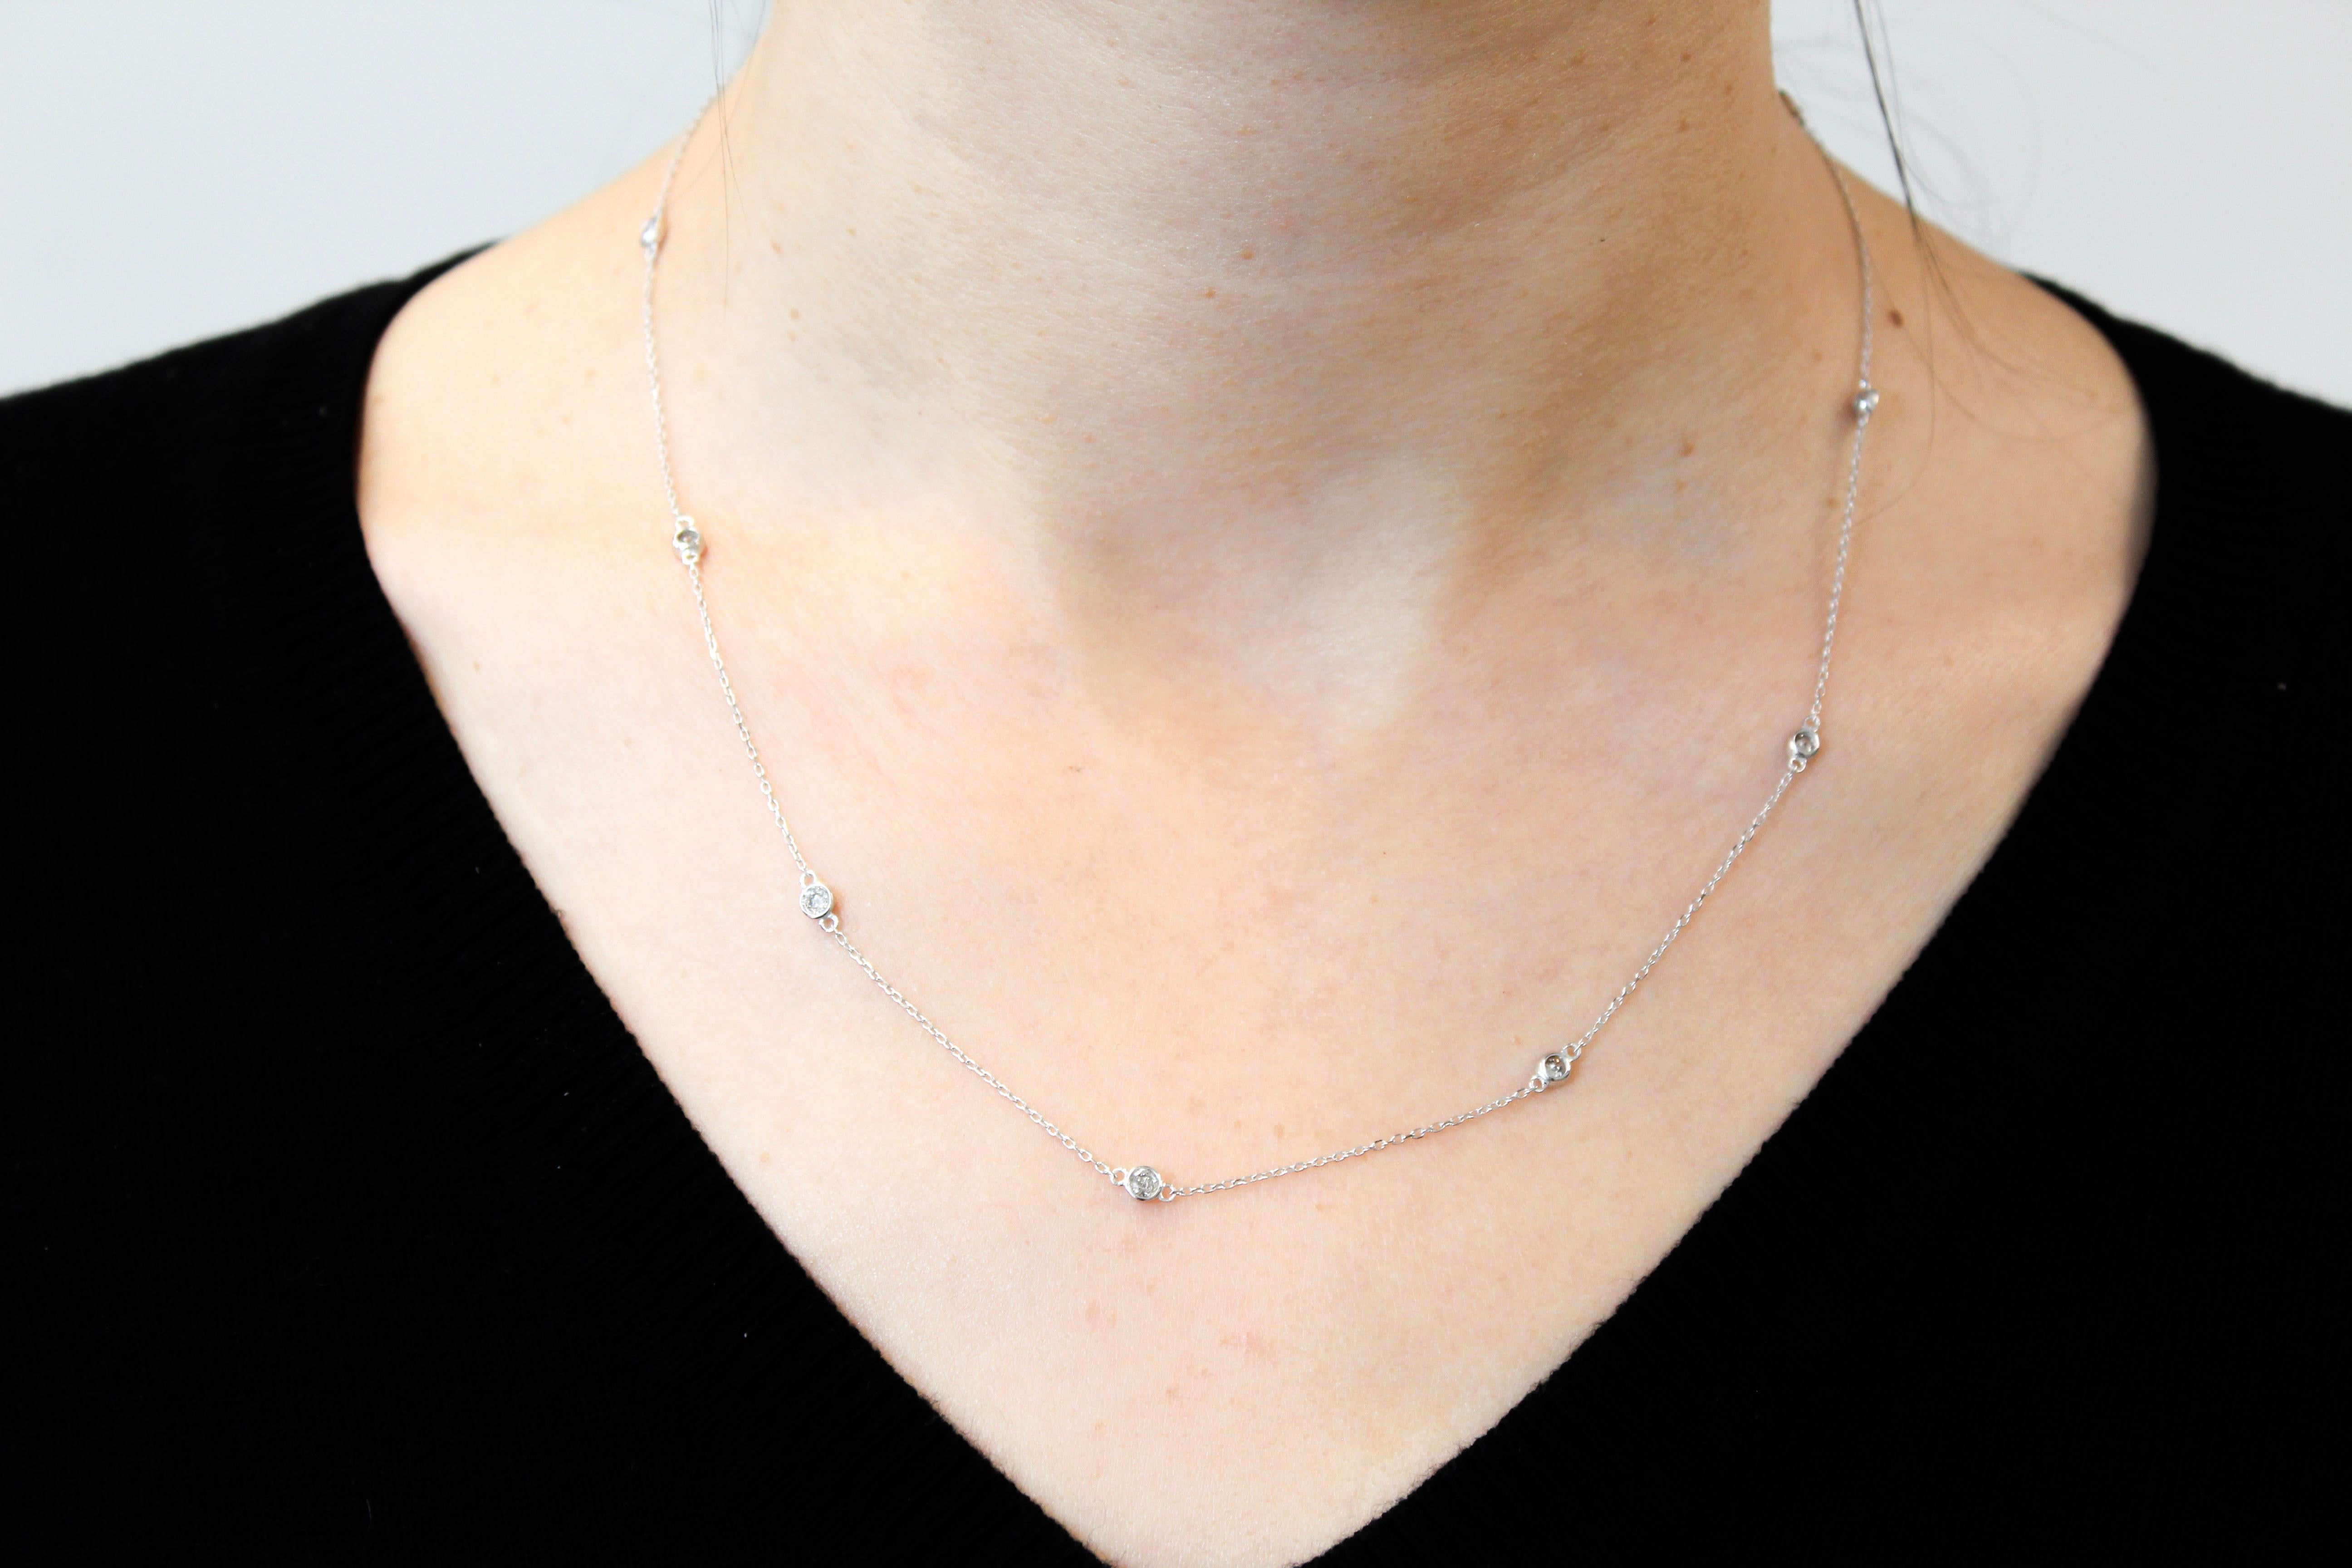 A gorgeous diamond necklace will rarely go overlooked. This 18” piece is both rare and stunning. It includes bezels that set white round diamonds. There are 10 white diamonds that total 0.50 and are I-J color and I1/I2 clarity. This versatile